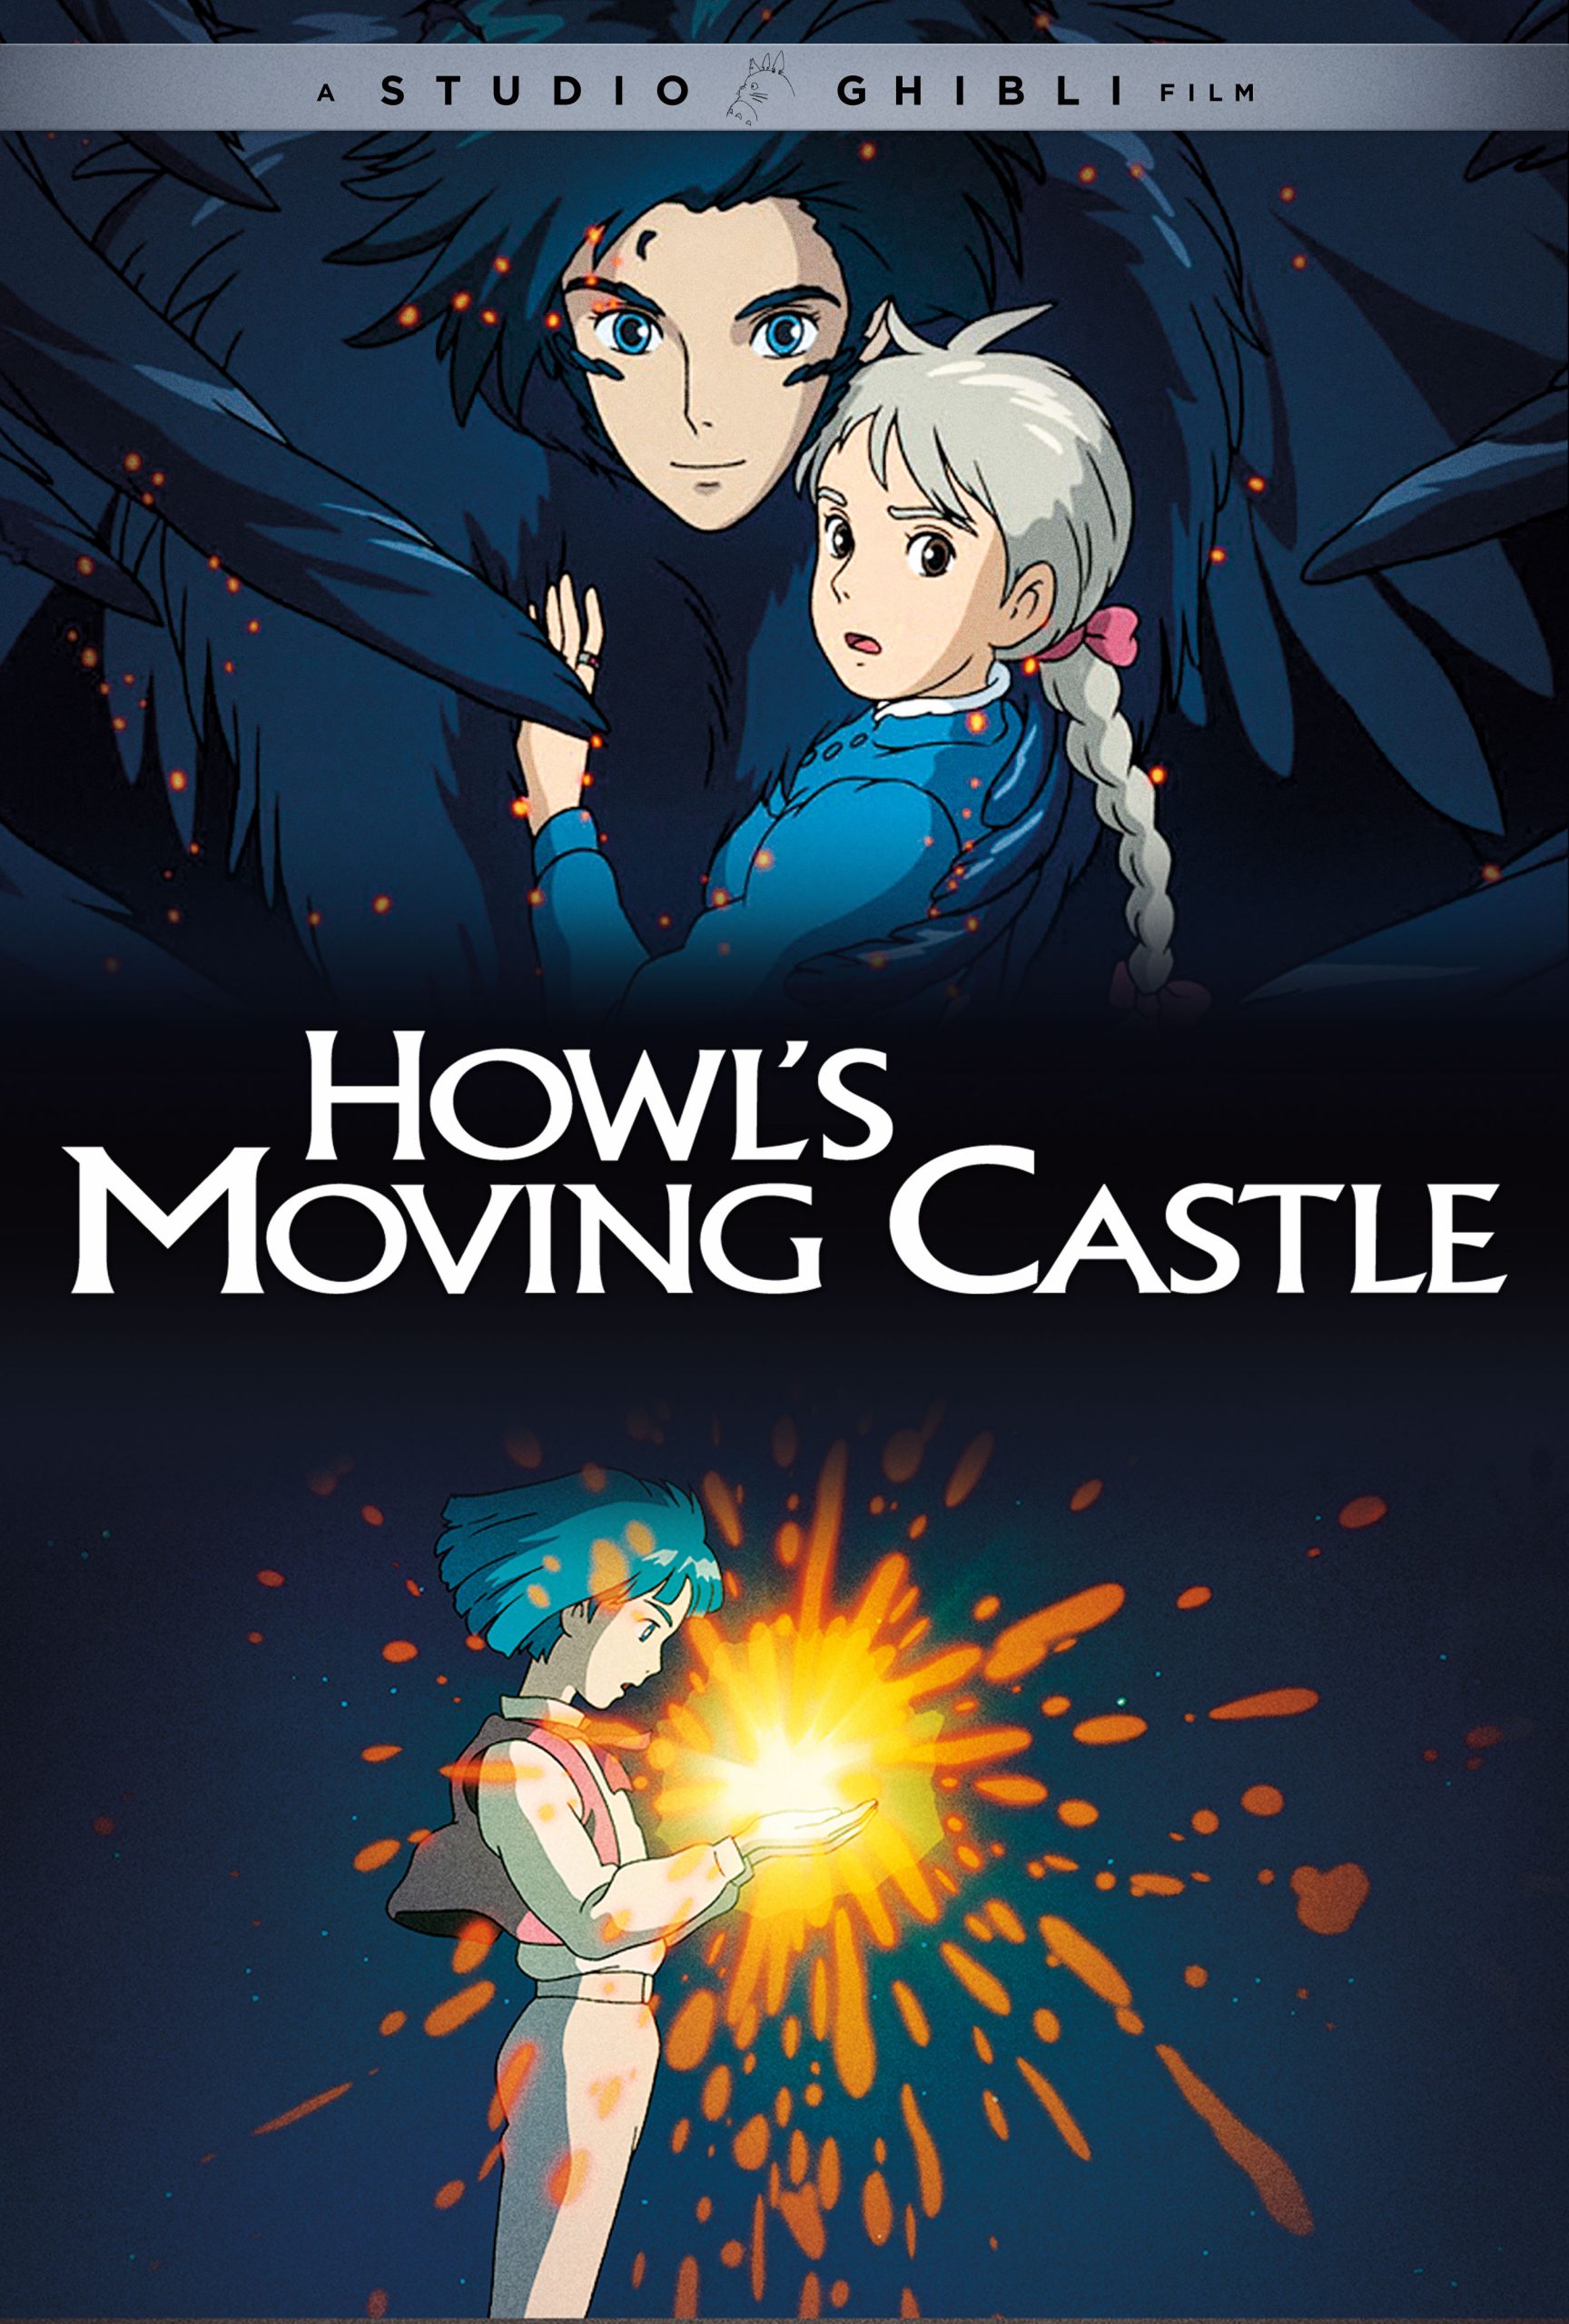 Howl’s Moving Castle 2004 Hindi Dual Audio 480p BluRay 450MB ESub Download